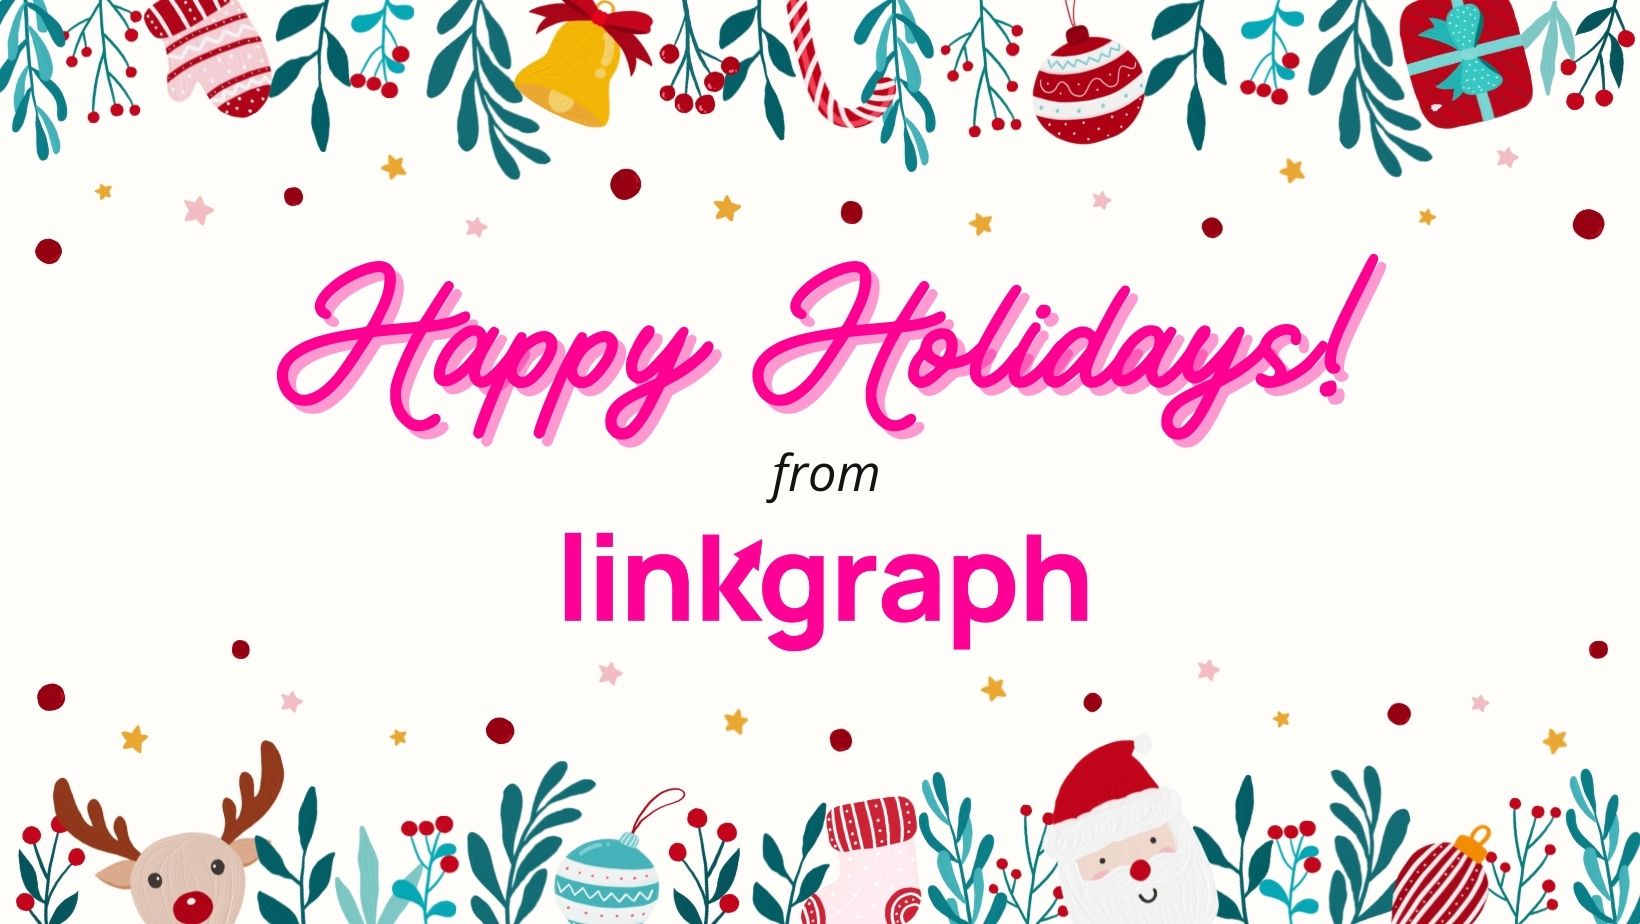 Christmas graphic border with the owrds happy holiday from LinkGraph in pink int he center